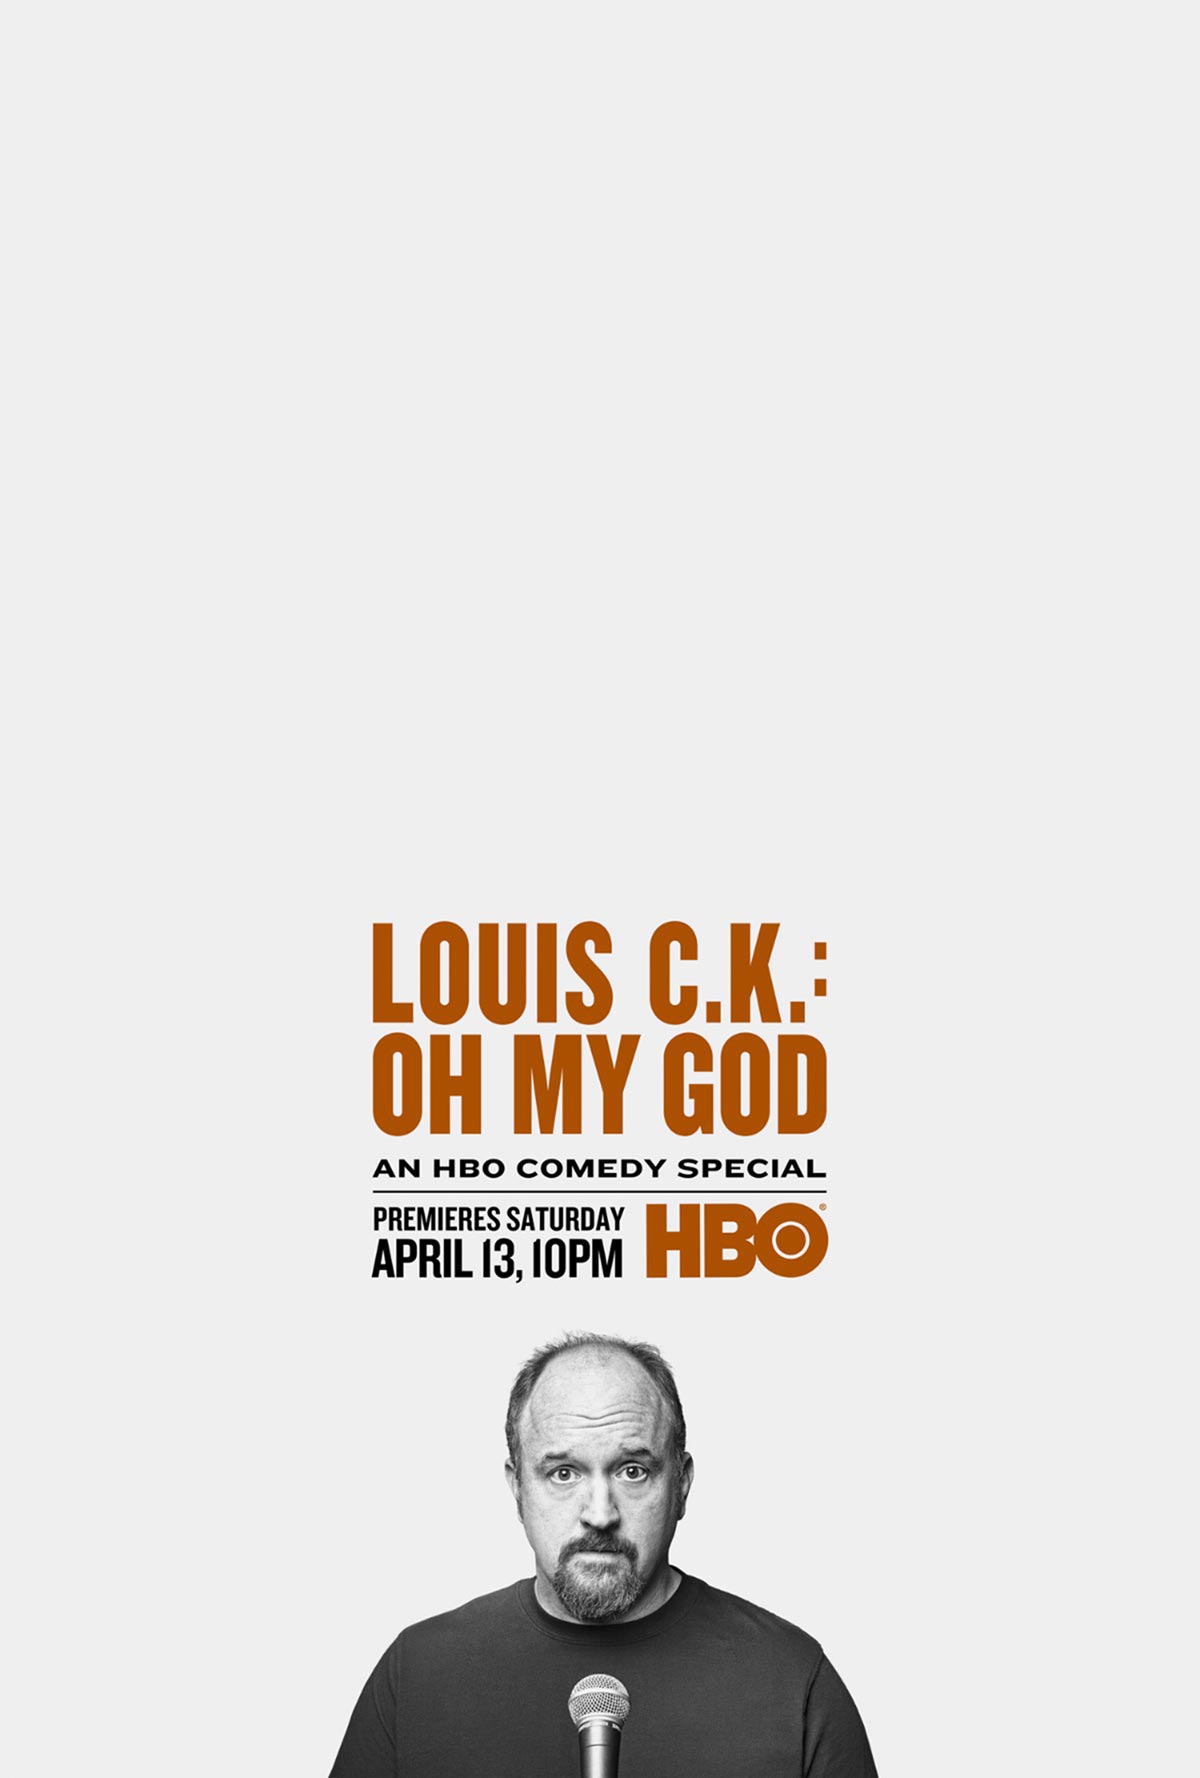 Louis C.K. Hilarious dvd cover - DVD Covers & Labels by